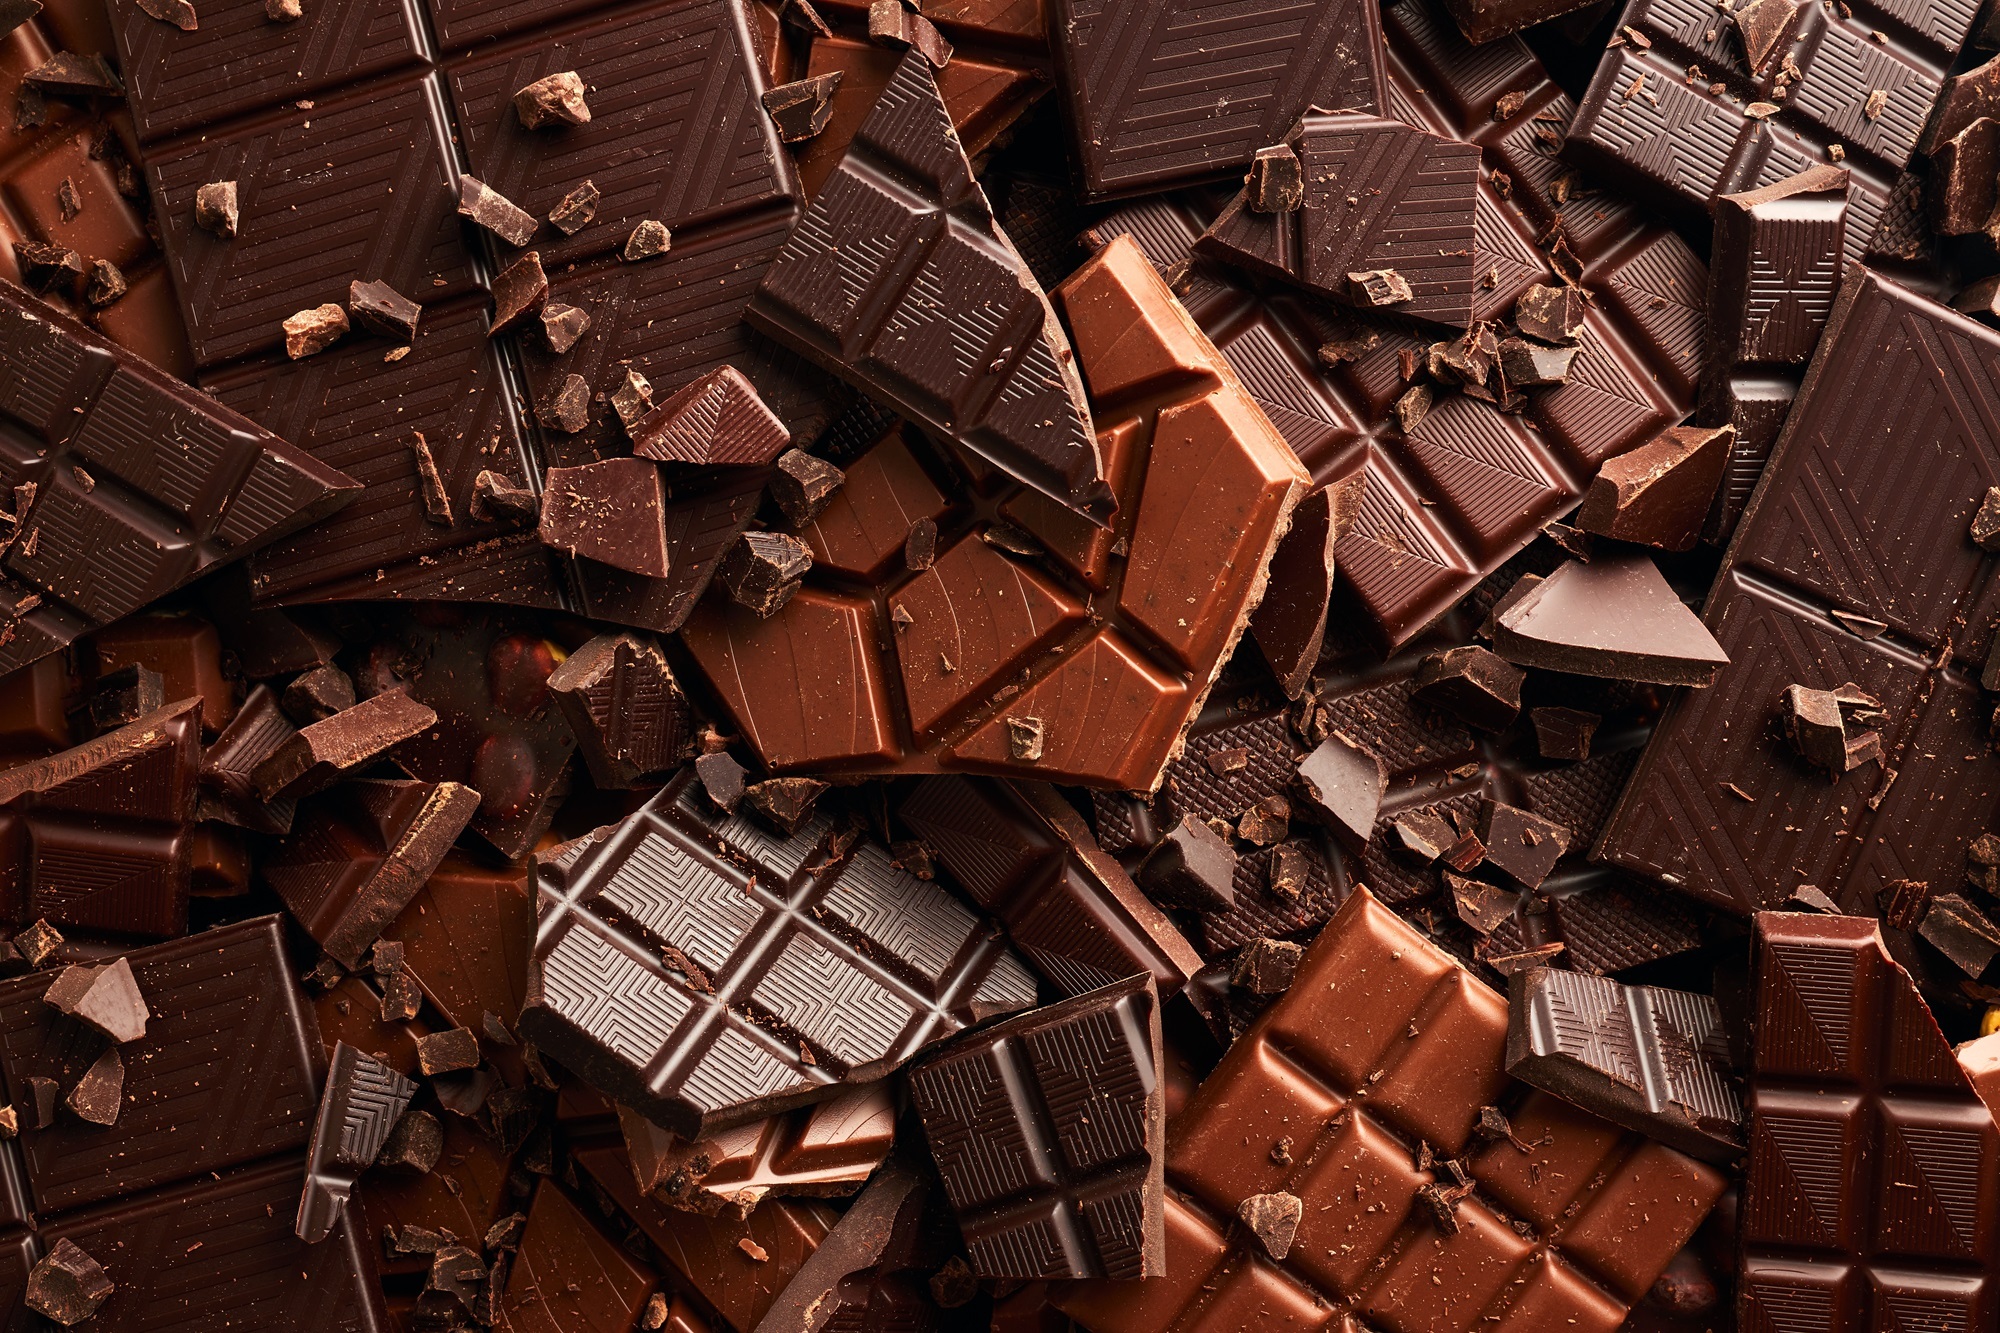 Here's how much more chocolate costs in NYC than the rest of the US